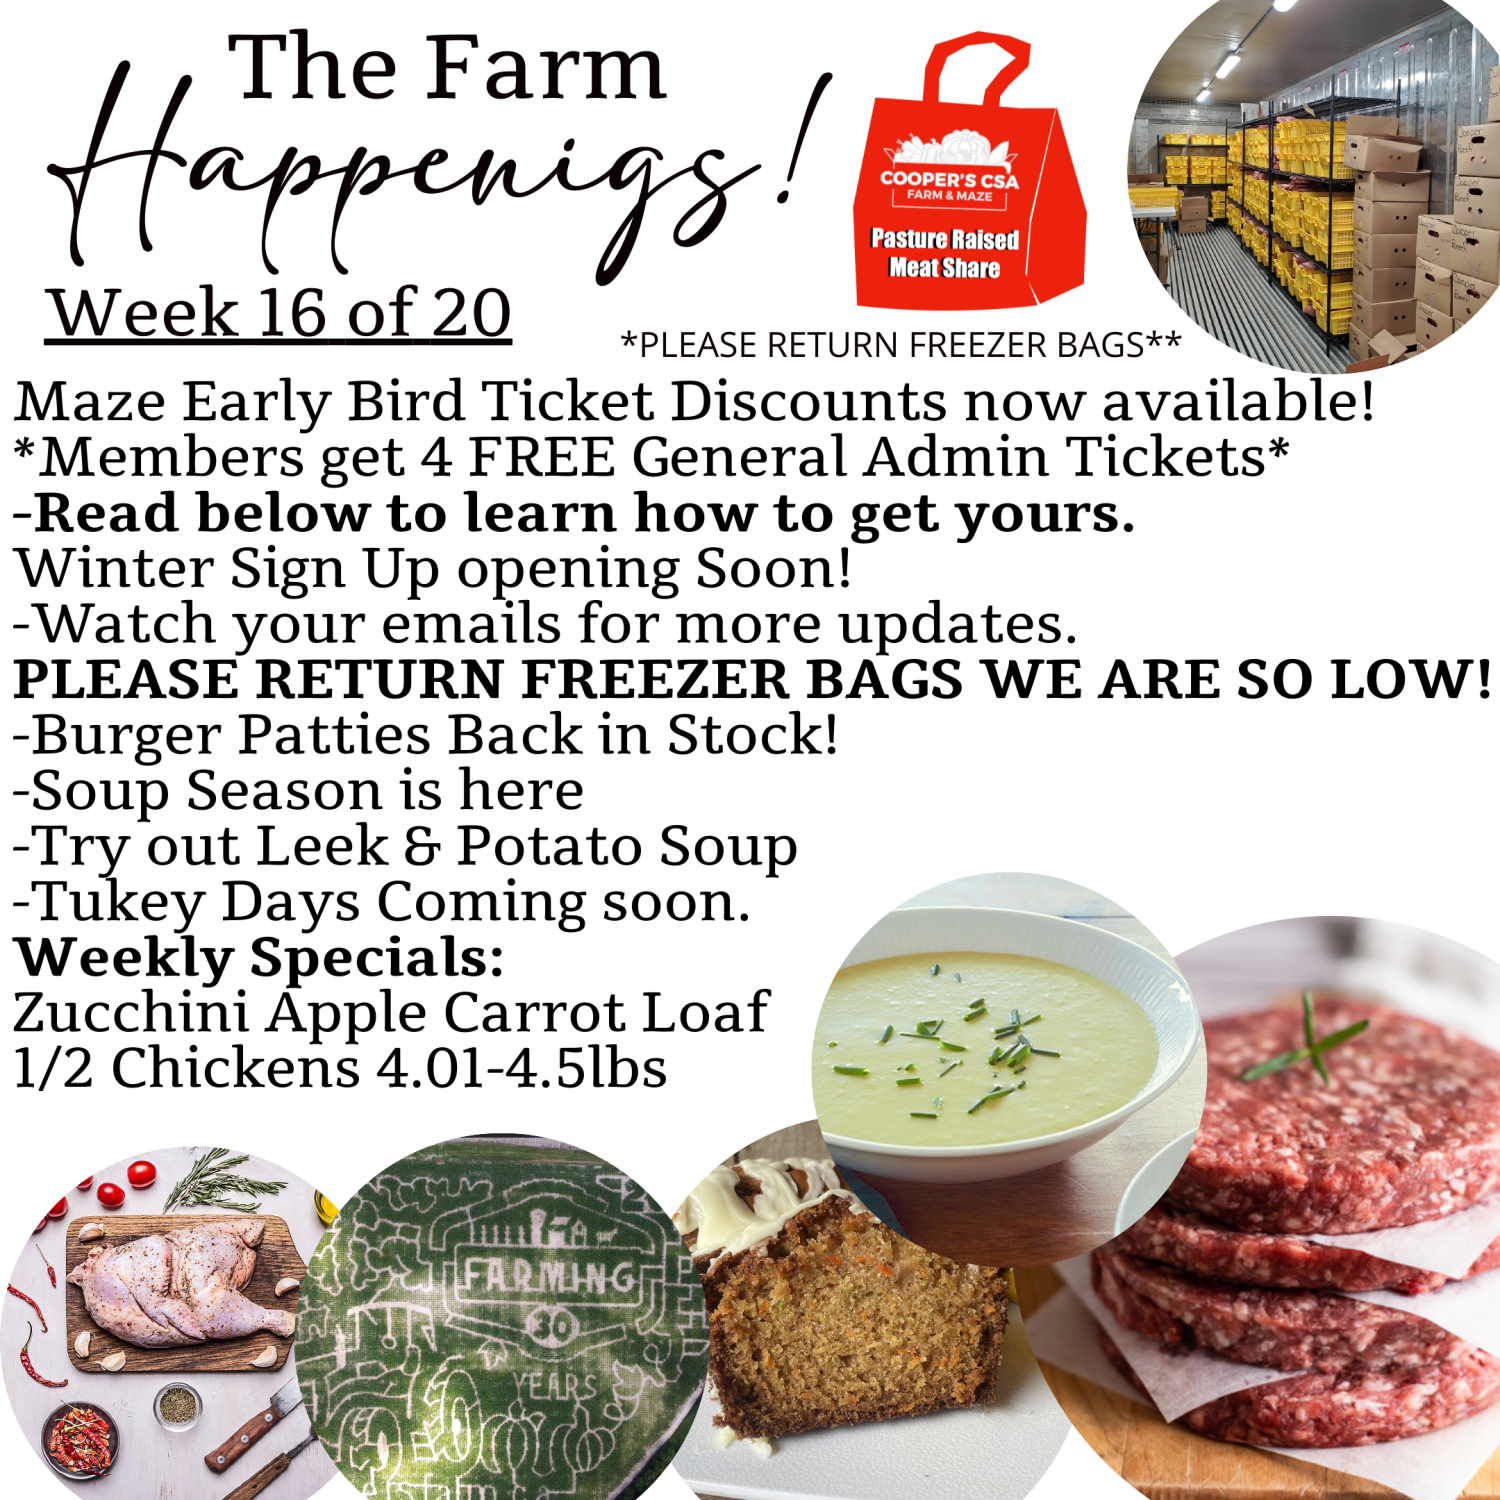 Previous Happening: "Pasture Meat Shares"-Coopers CSA Farm Farm Happenings Week 16